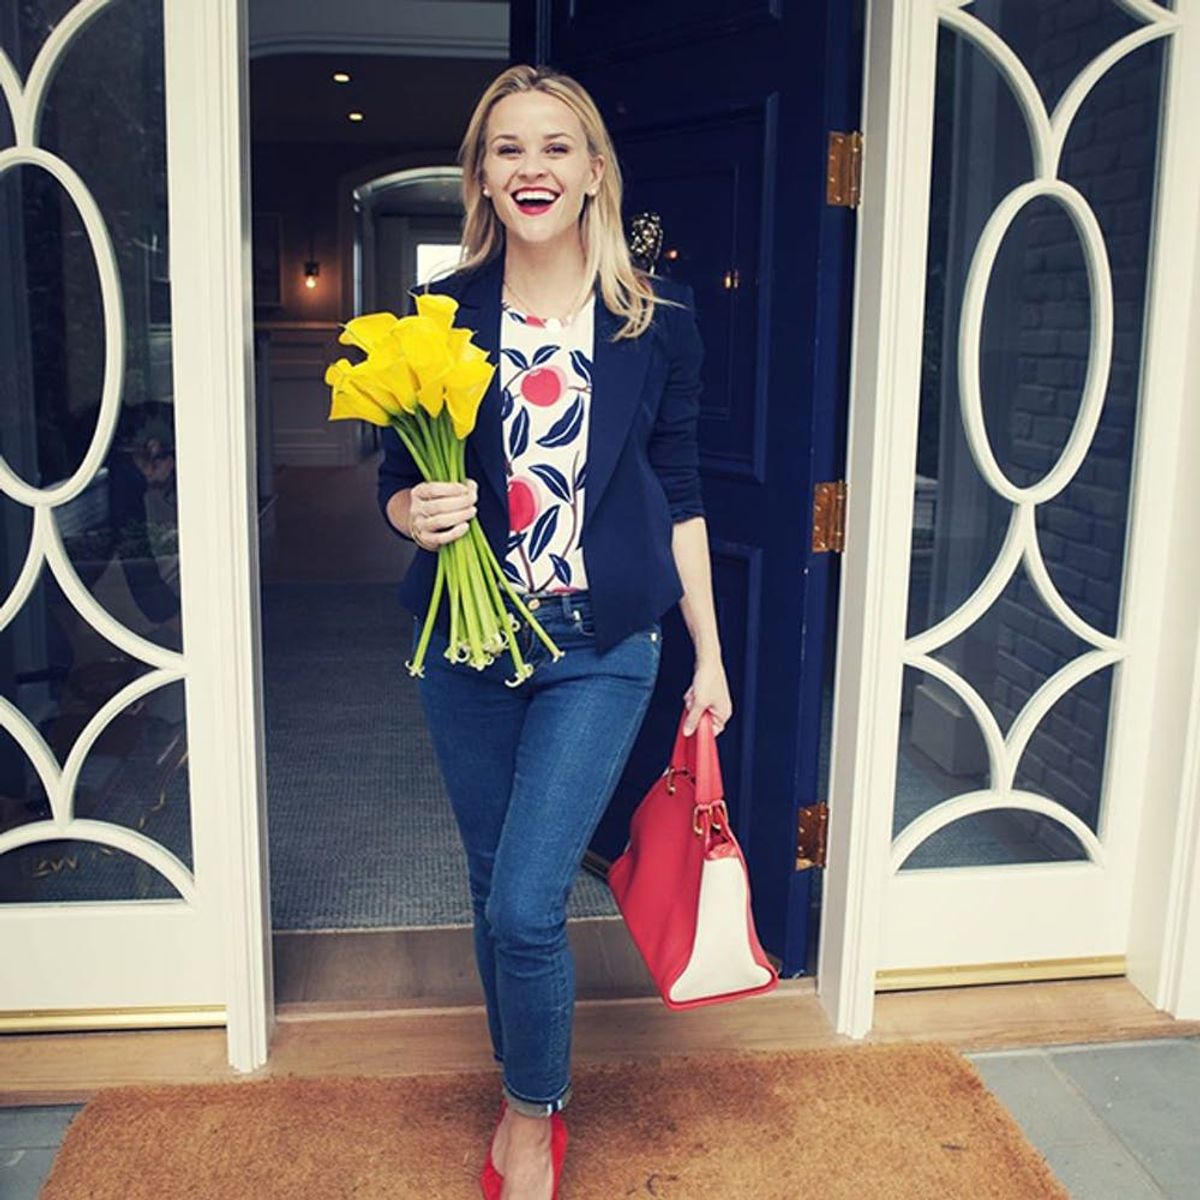 Reese Witherspoon Is Opening a Store — Get the Deets